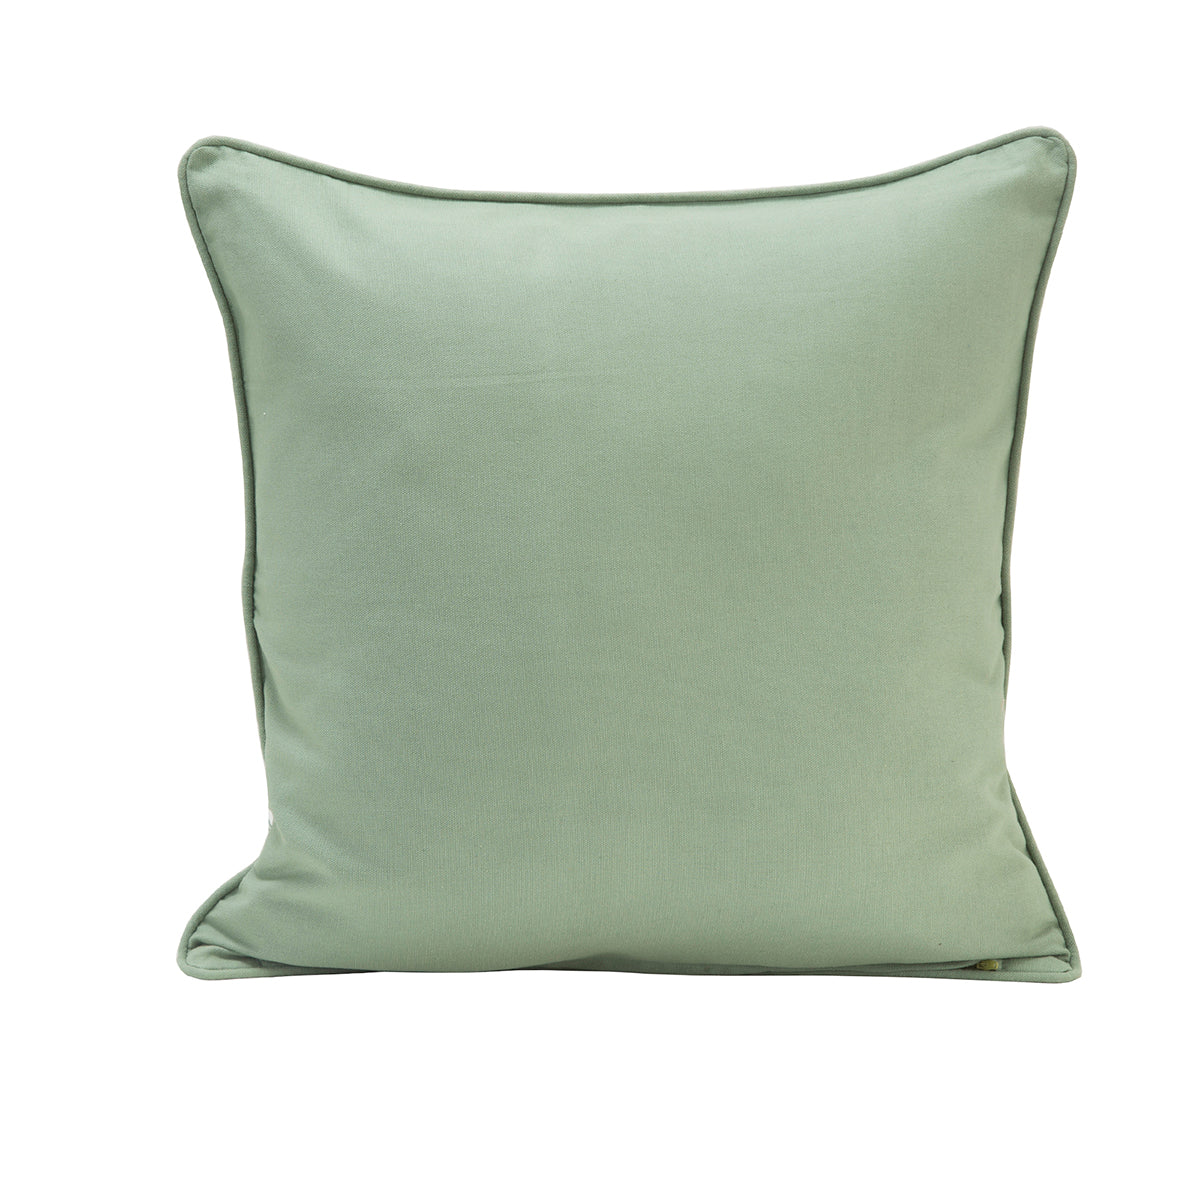 Stripped Illision Printed & Embroidered Cushion Cover